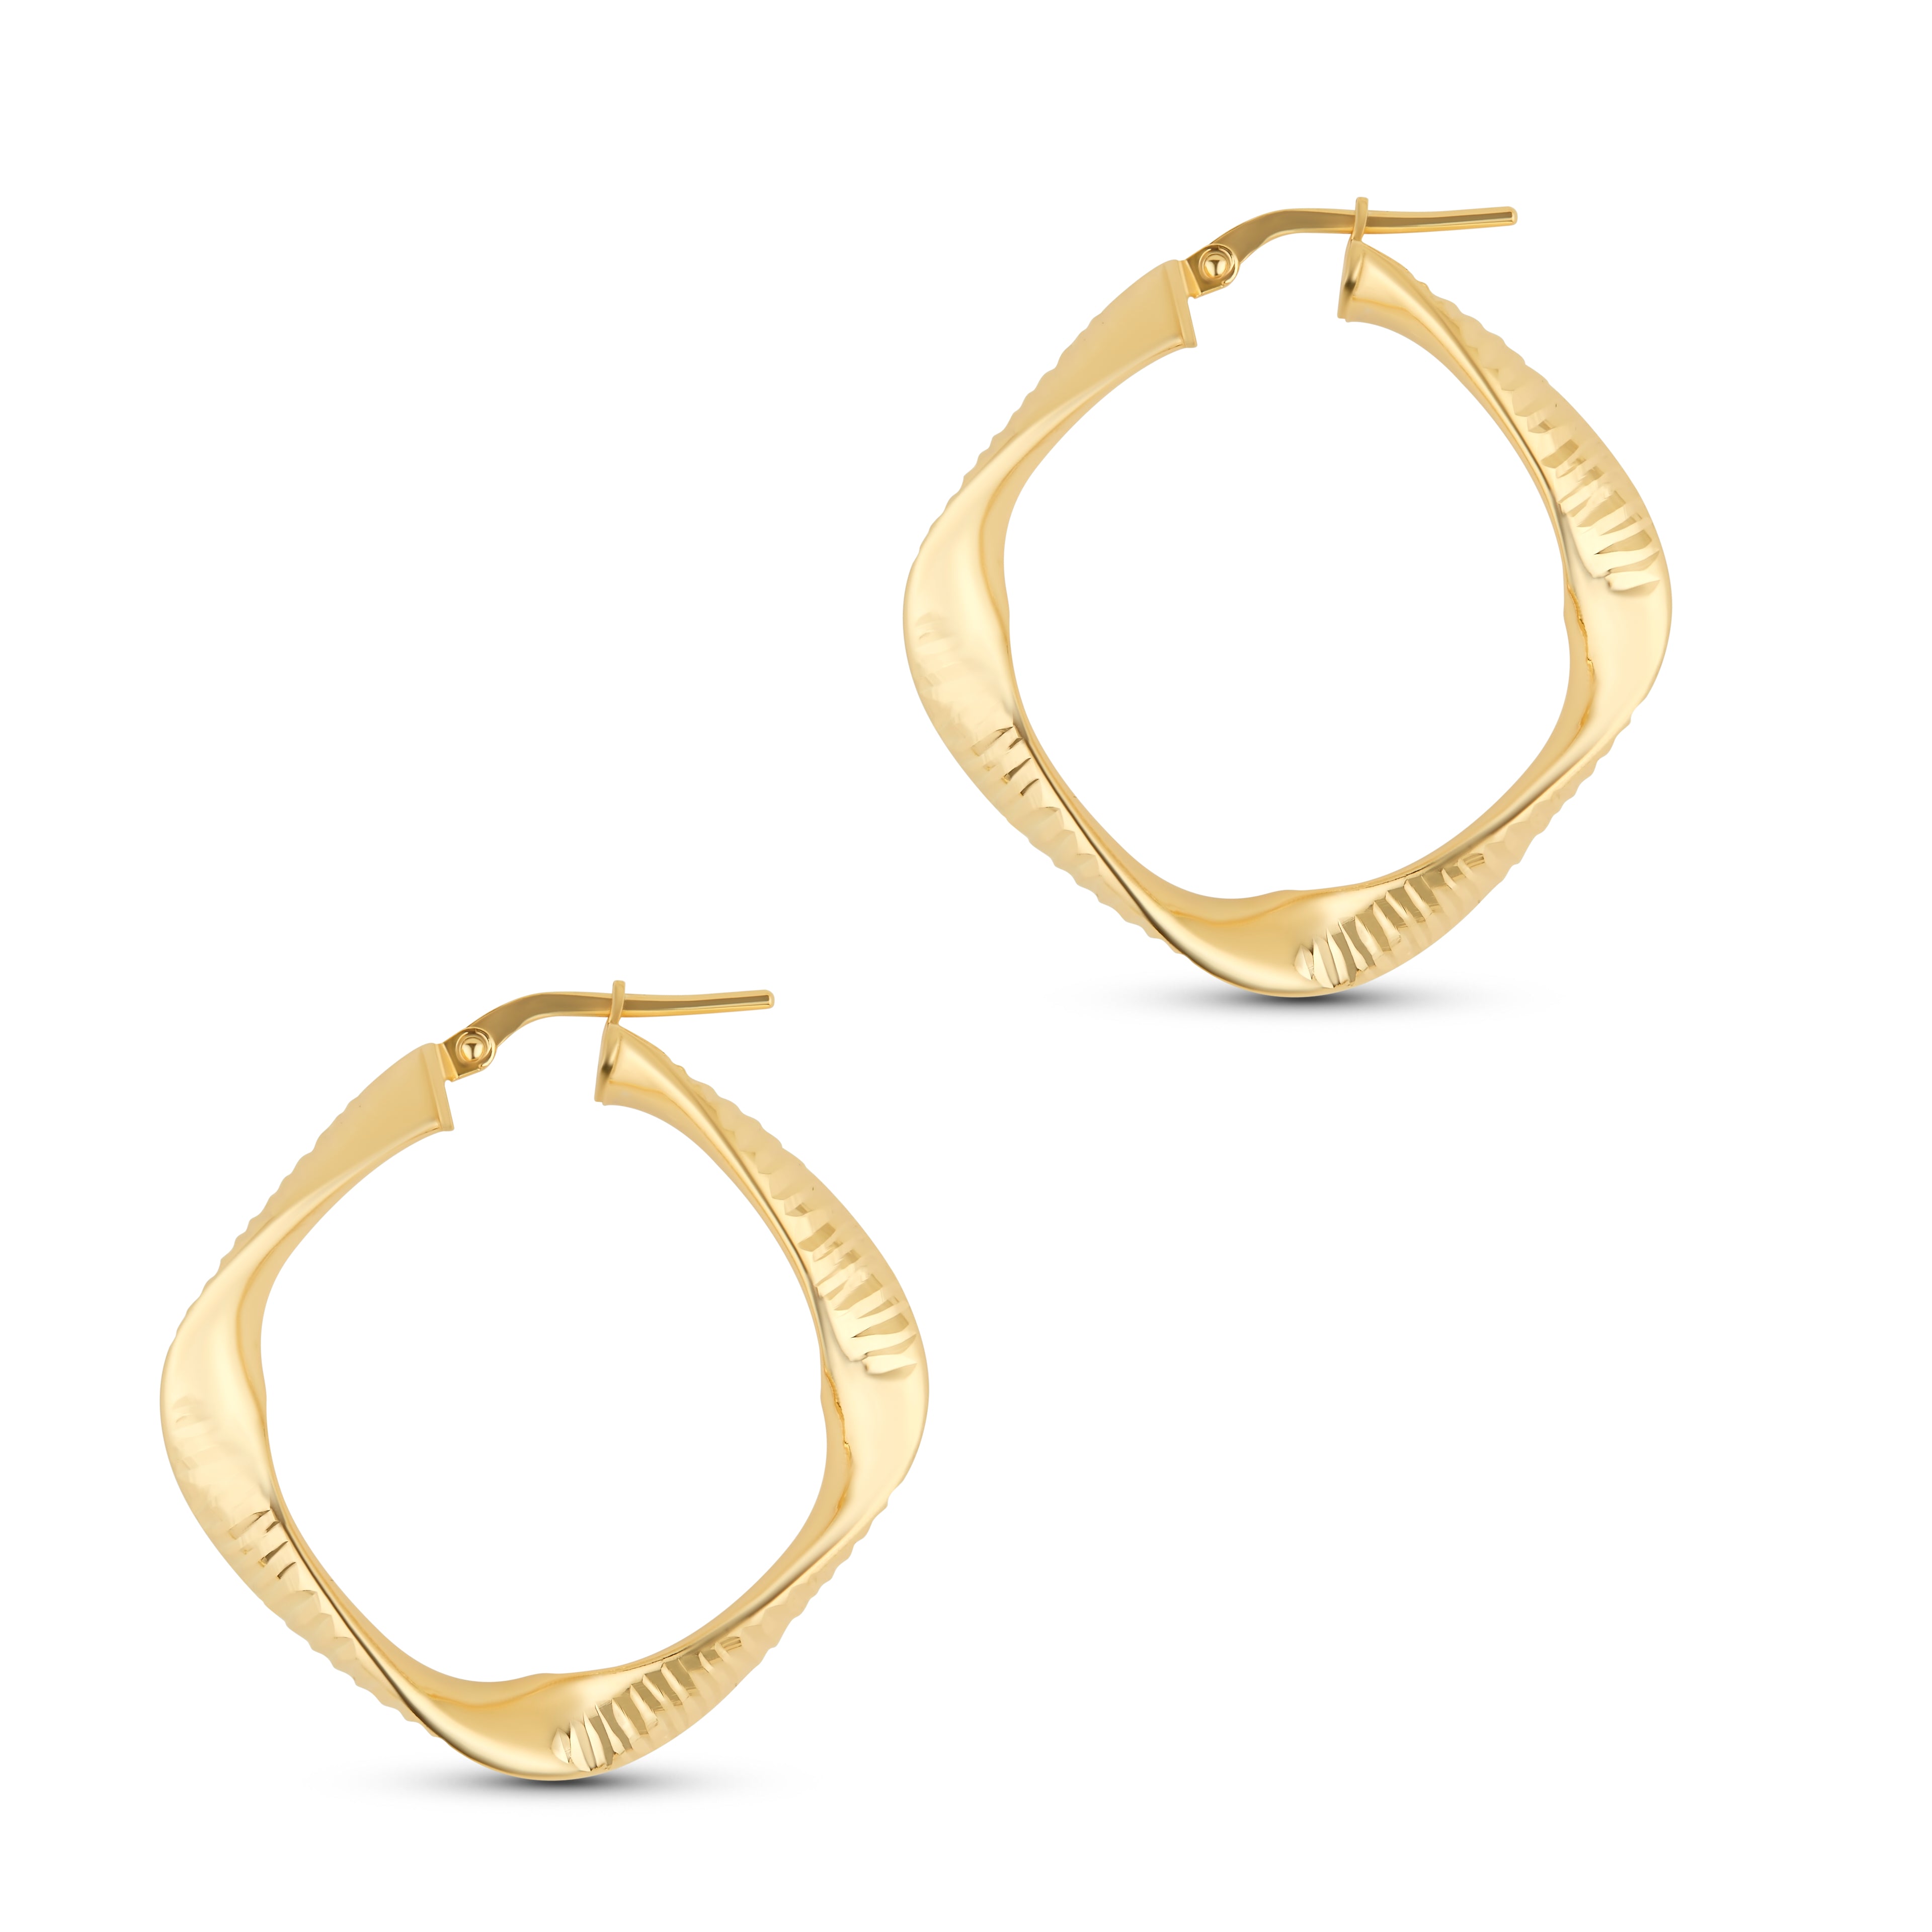 Textured Square Hoops - Silver